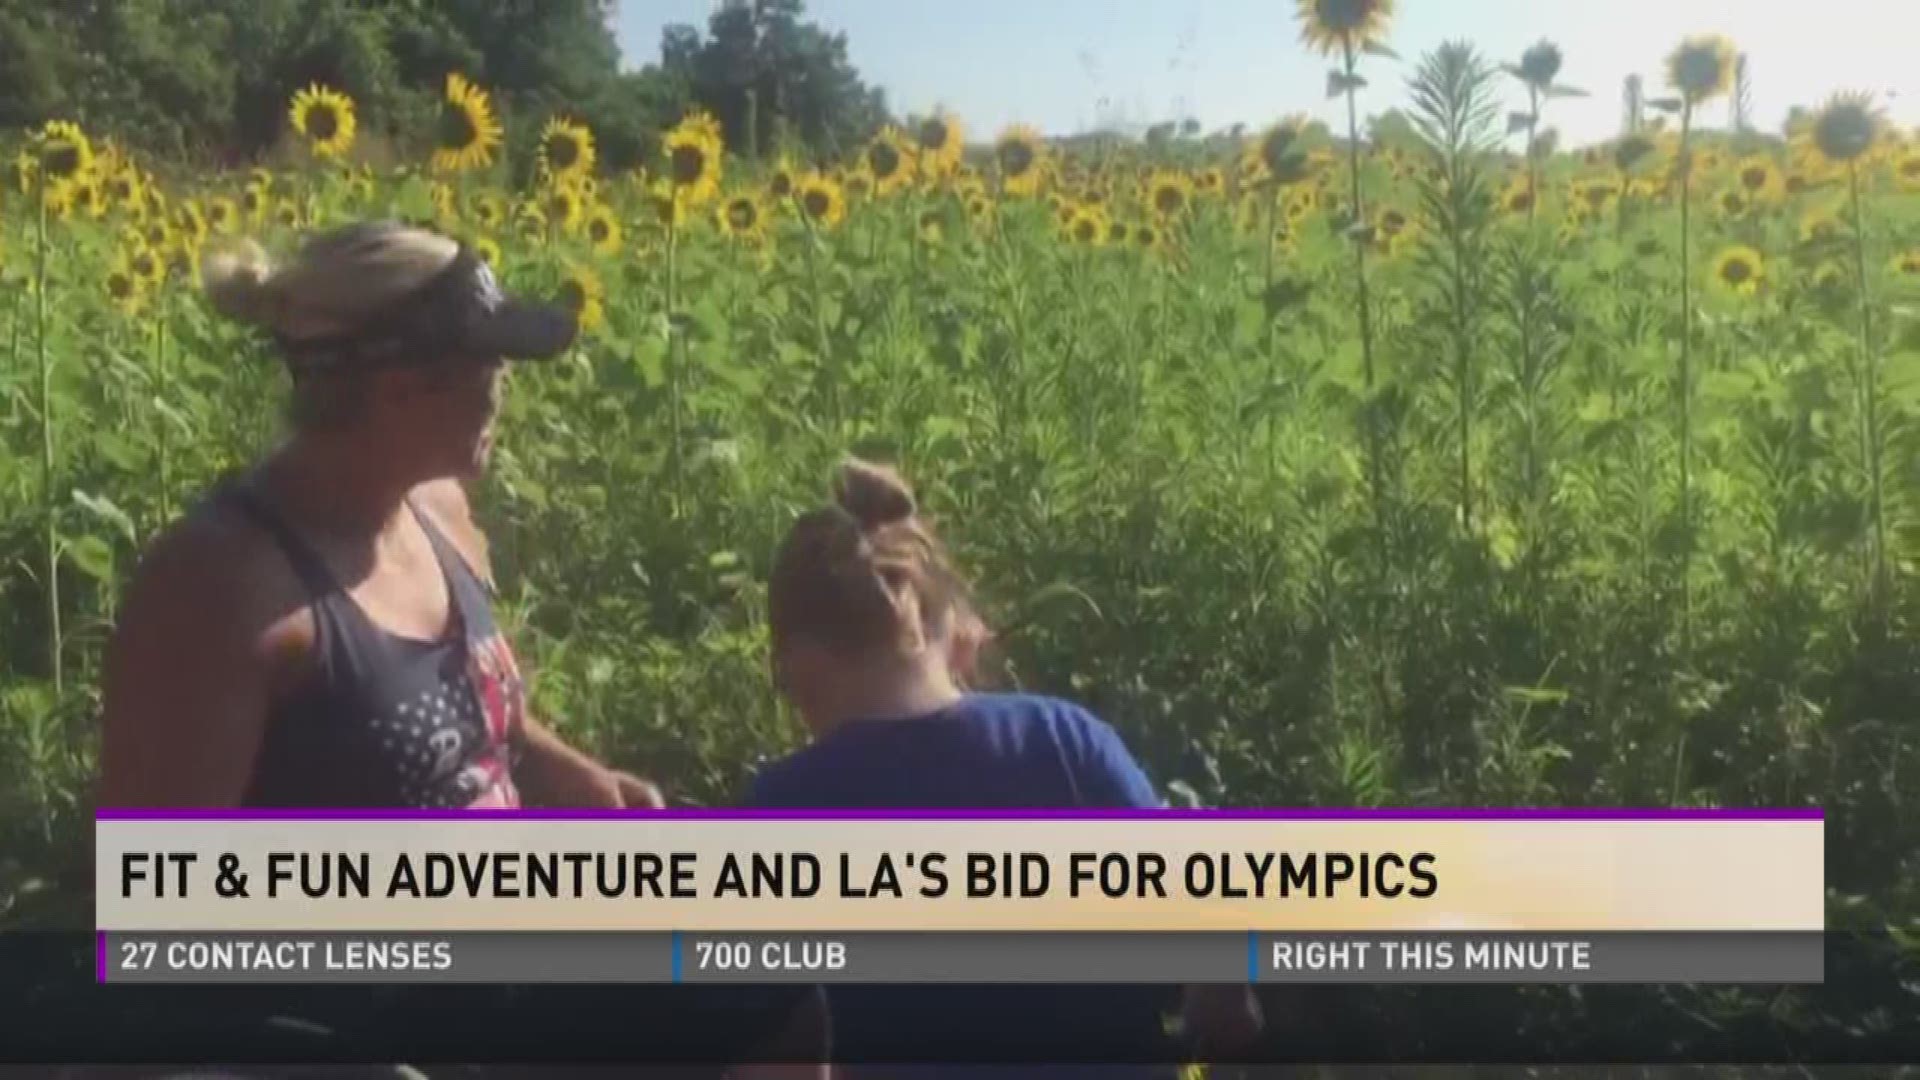 Missy Kane and Carly Pearson talk about their latest fit and fun adventure...and the push for L-A to host the Olympics: https://www.facebook.com/groups/1685681528342547/